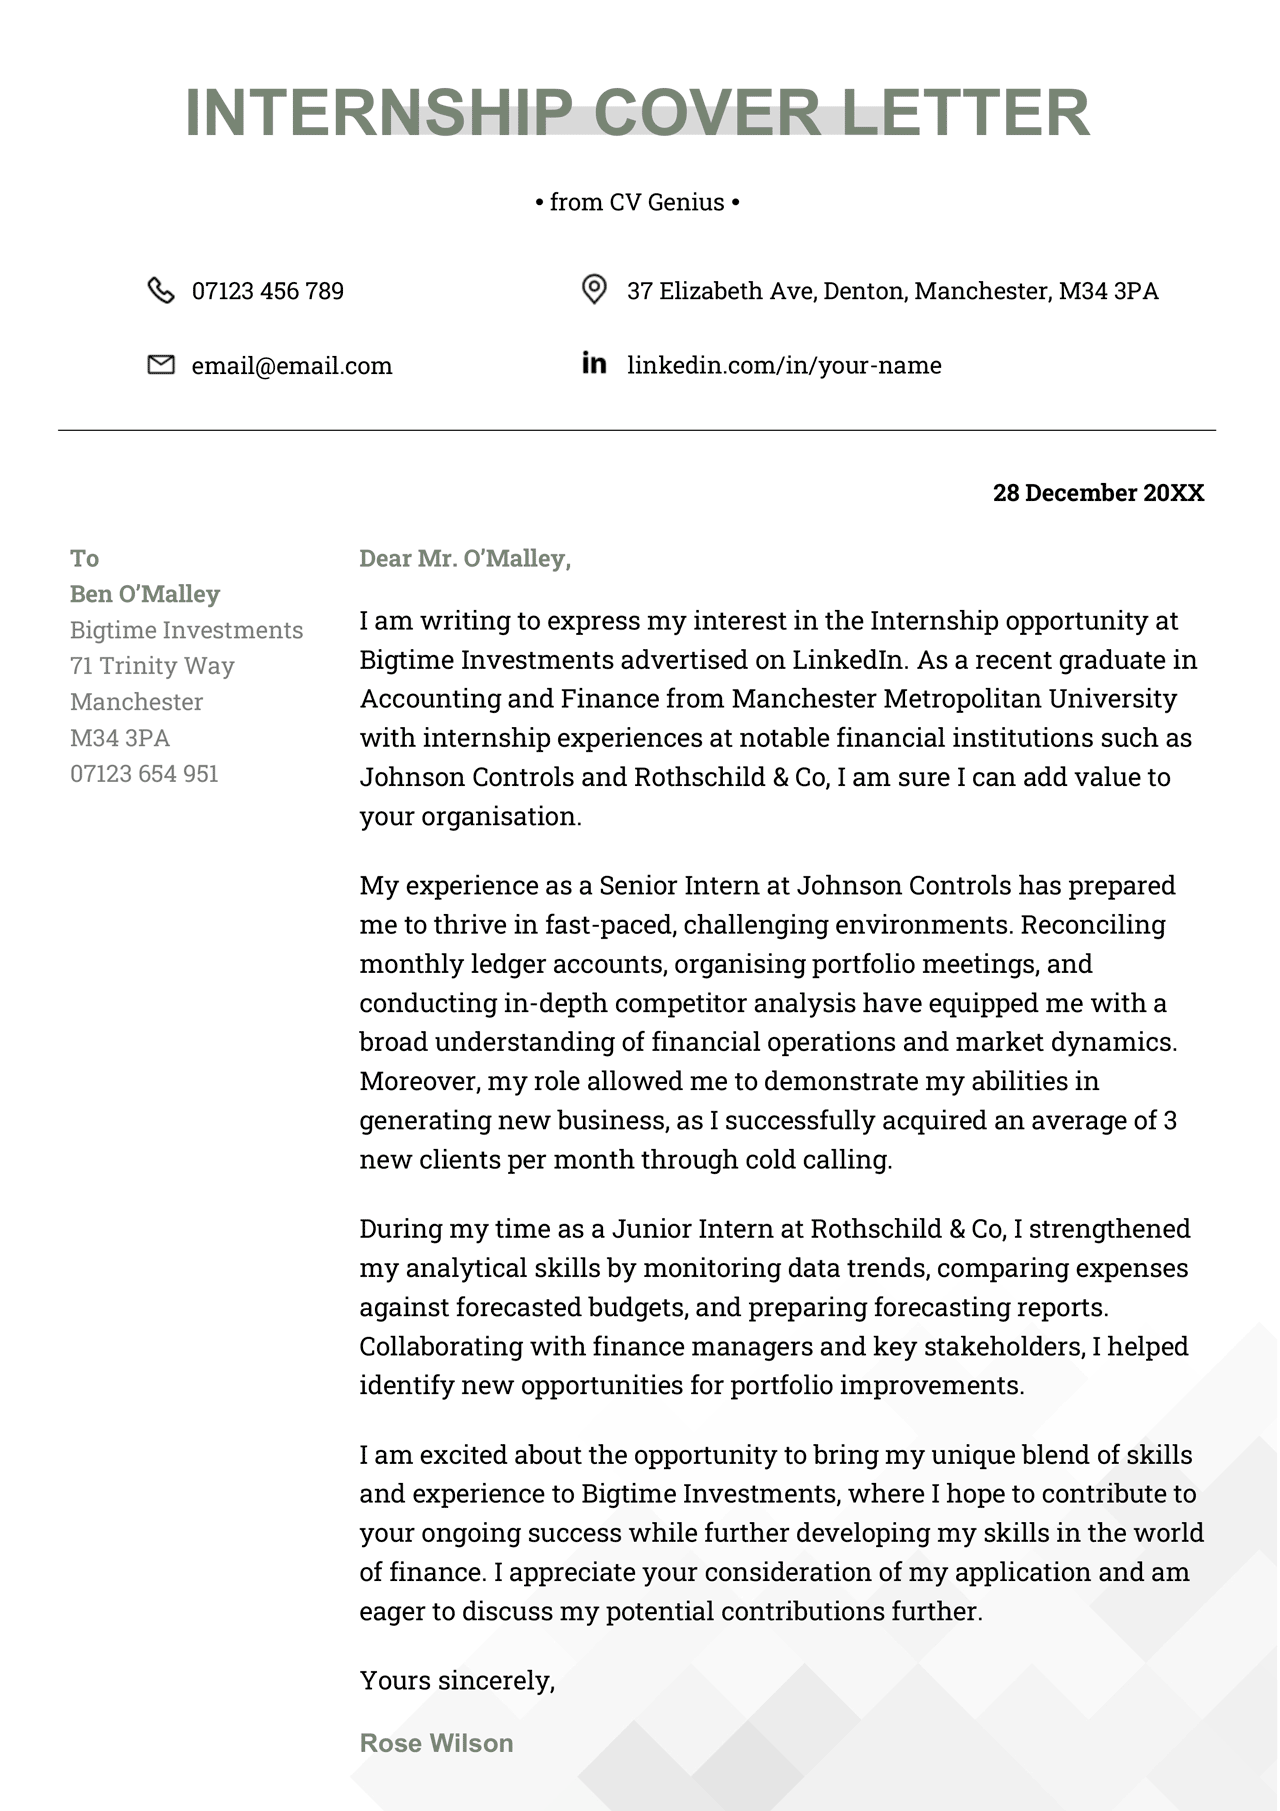 A cover letter for an internship on a template with green header text and diamonds in various shades of grey stacked in the bottom-right corner